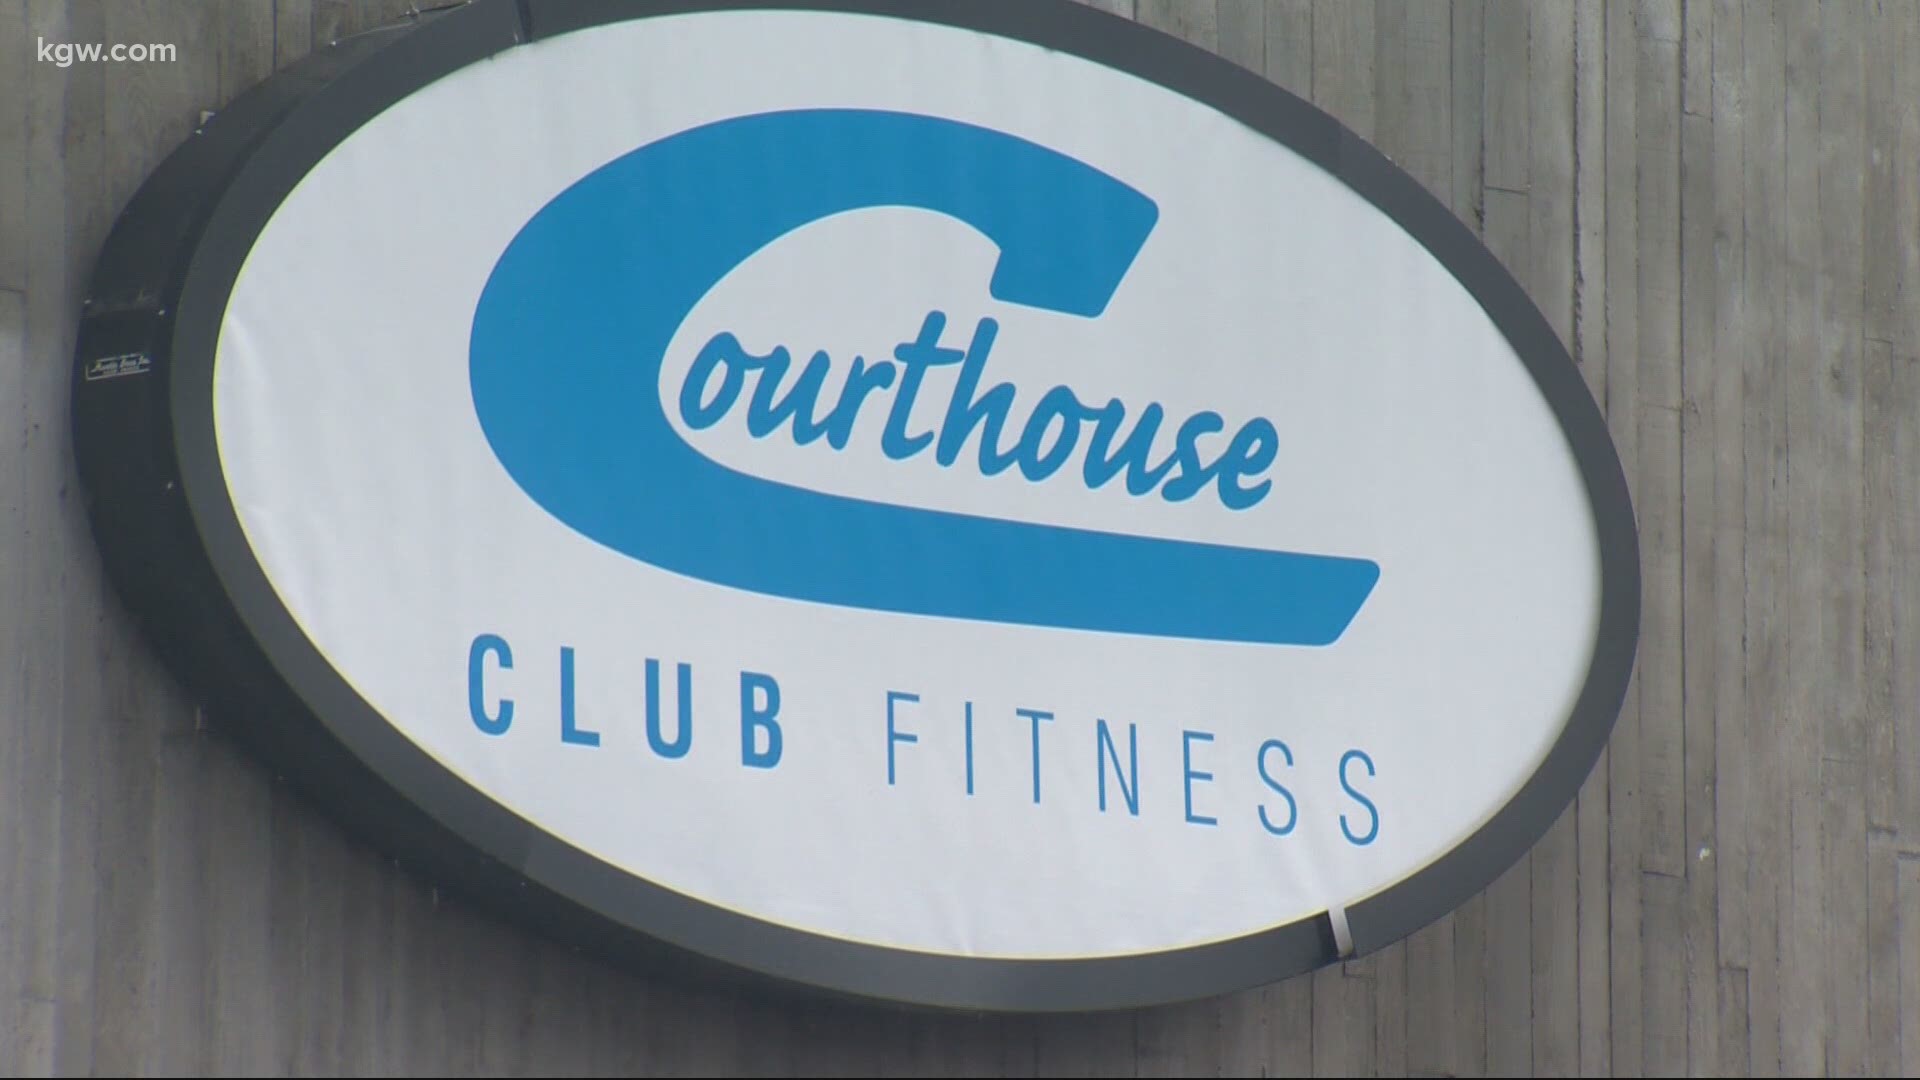 Courthouse Club Fitness was previously fined $90,000 for staying open during the two-week statewide freeze in November.